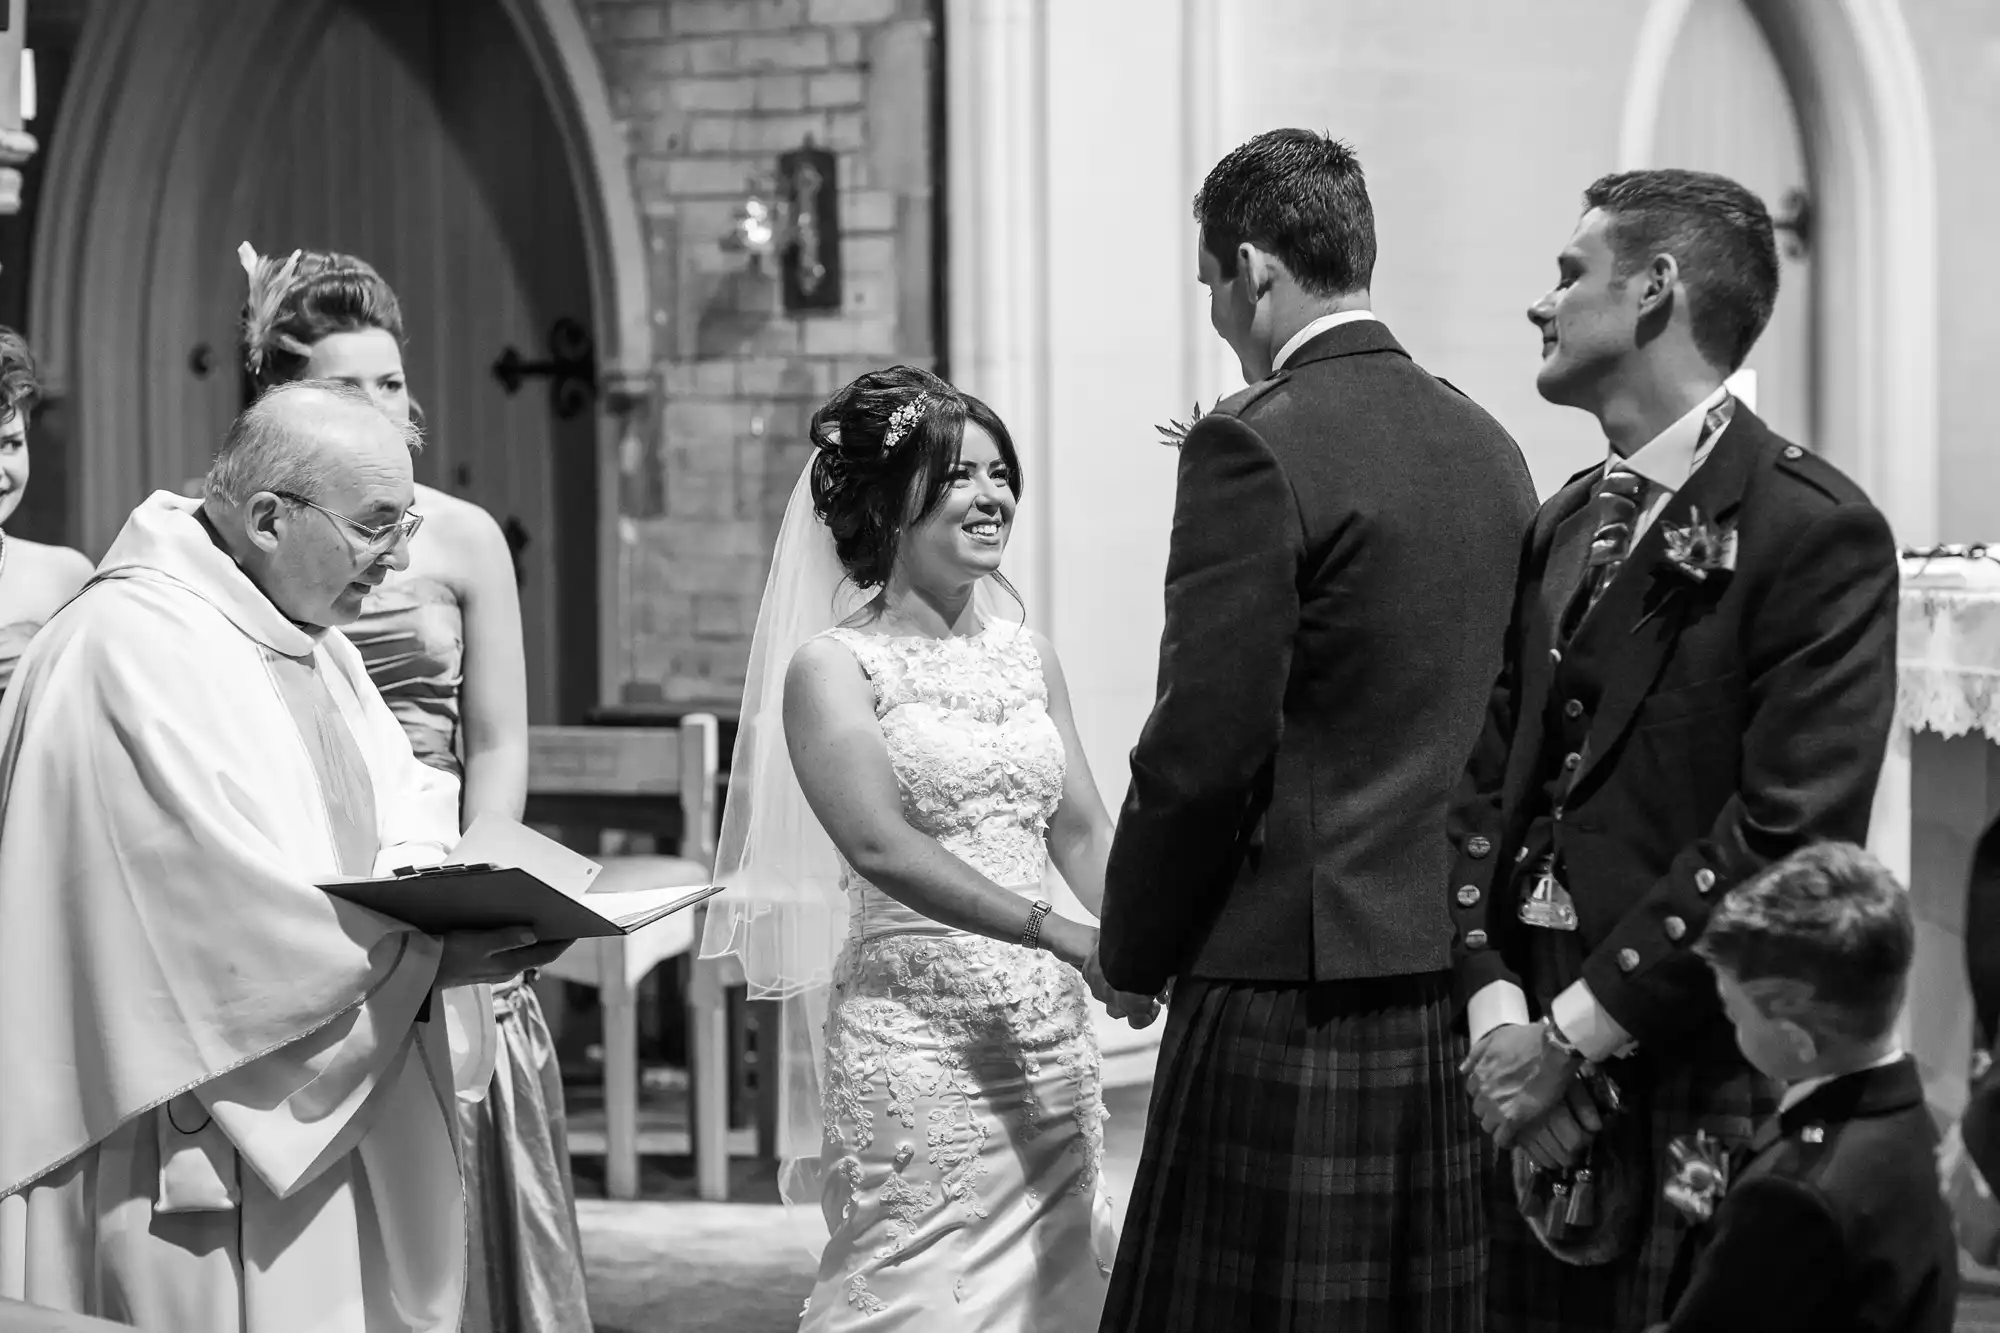 Bride in a lace dress smiling at the groom in a suit, with a priest and best man nearby, during a wedding ceremony inside a church.